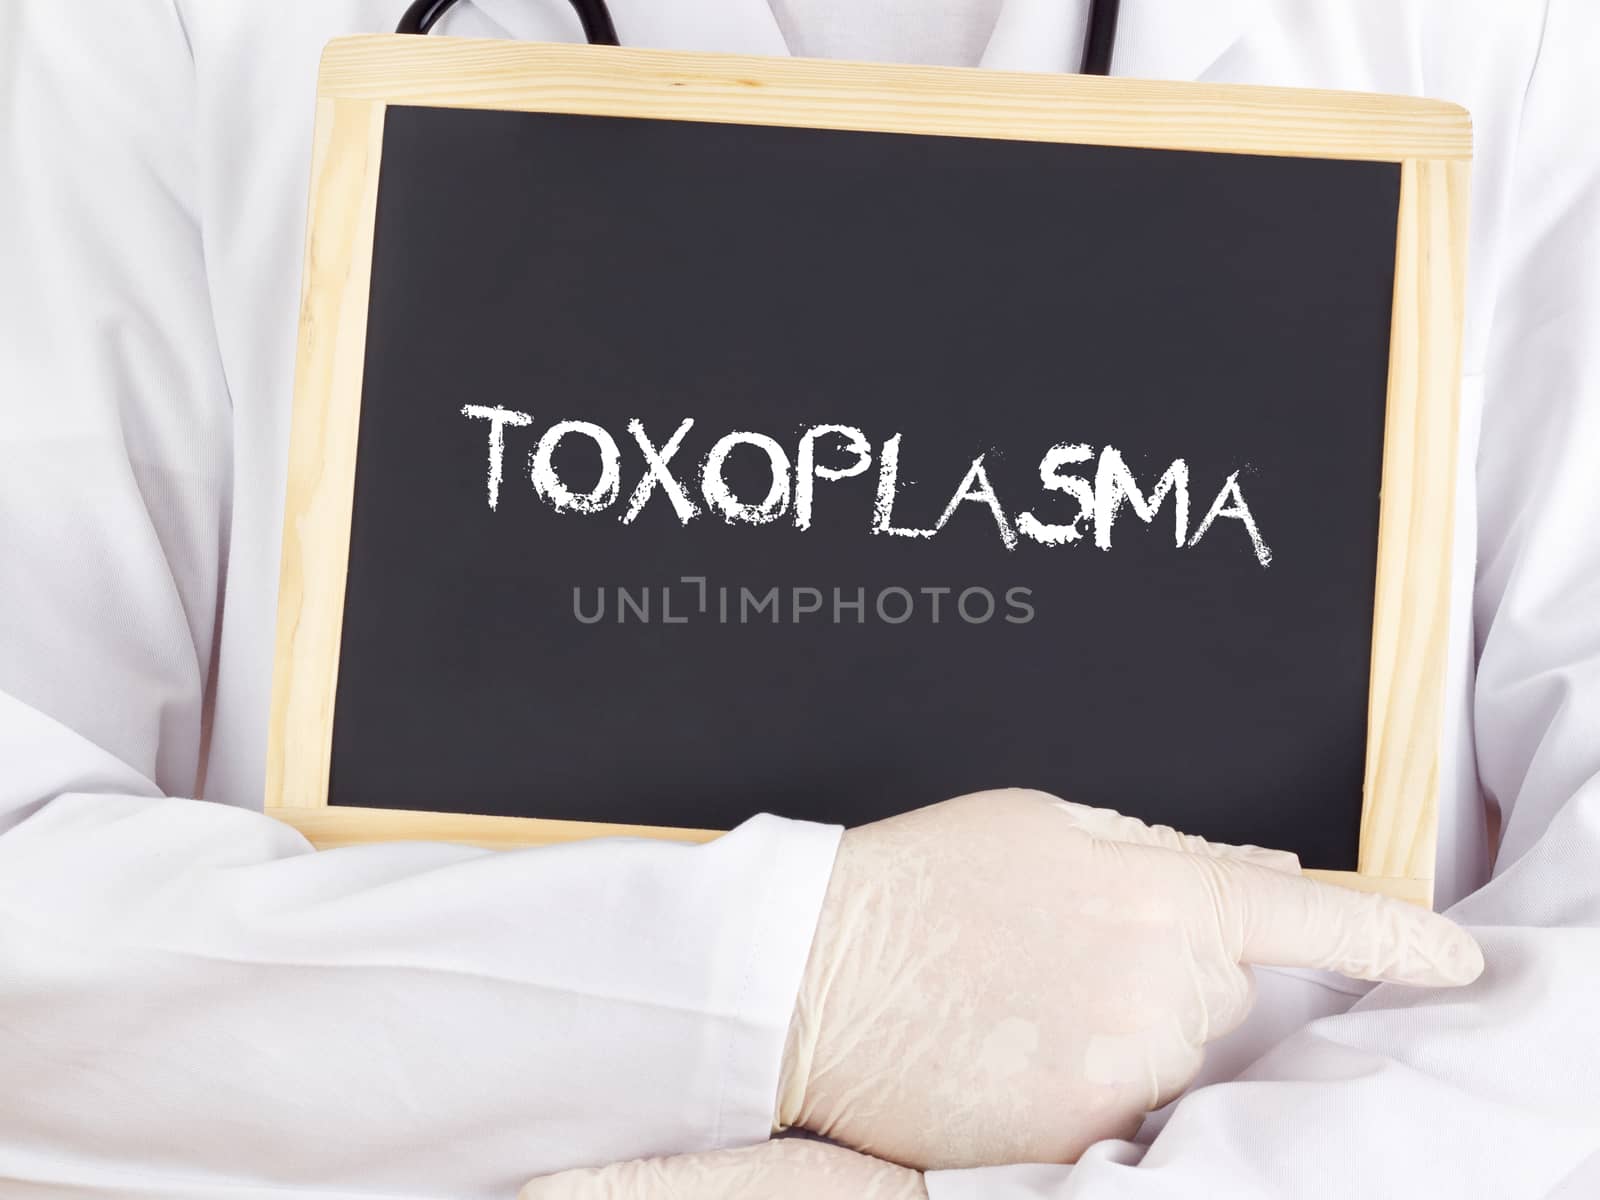 Doctor shows information: Toxoplasma by gwolters